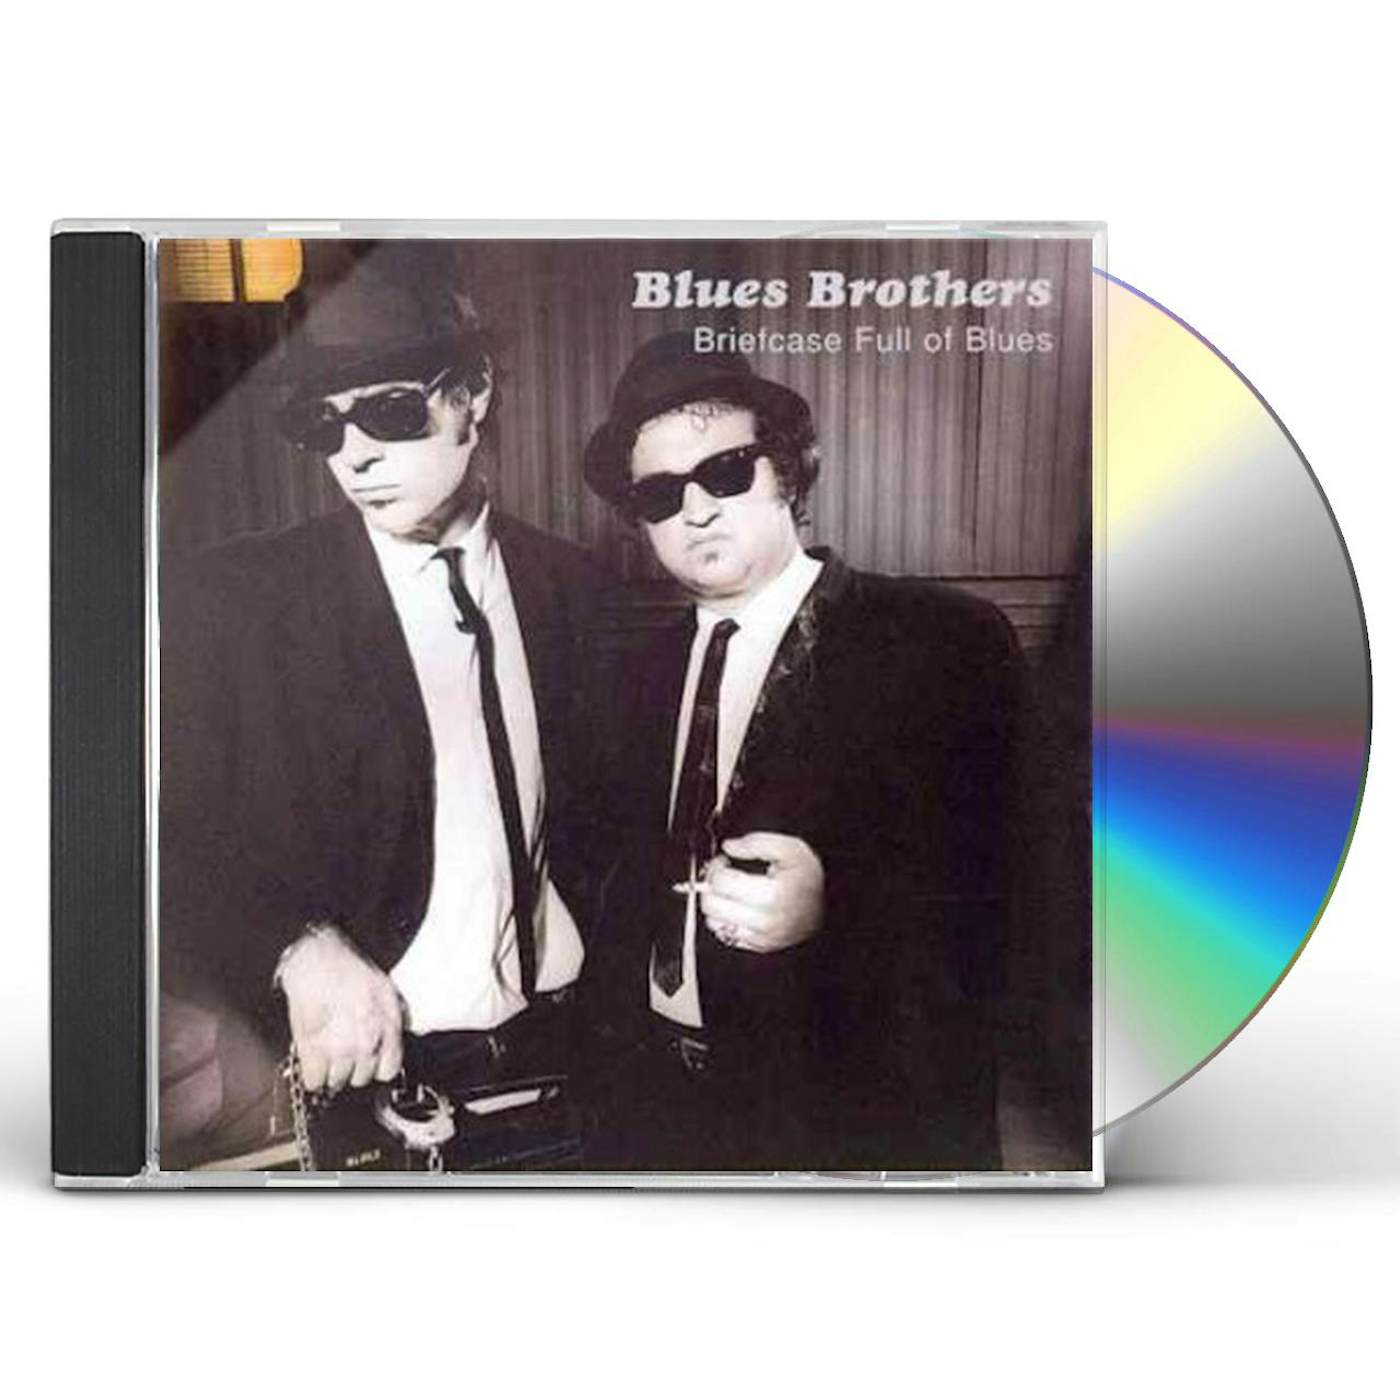 The Blues & Brothers BRIEFCASE FULL OF BLUES CD